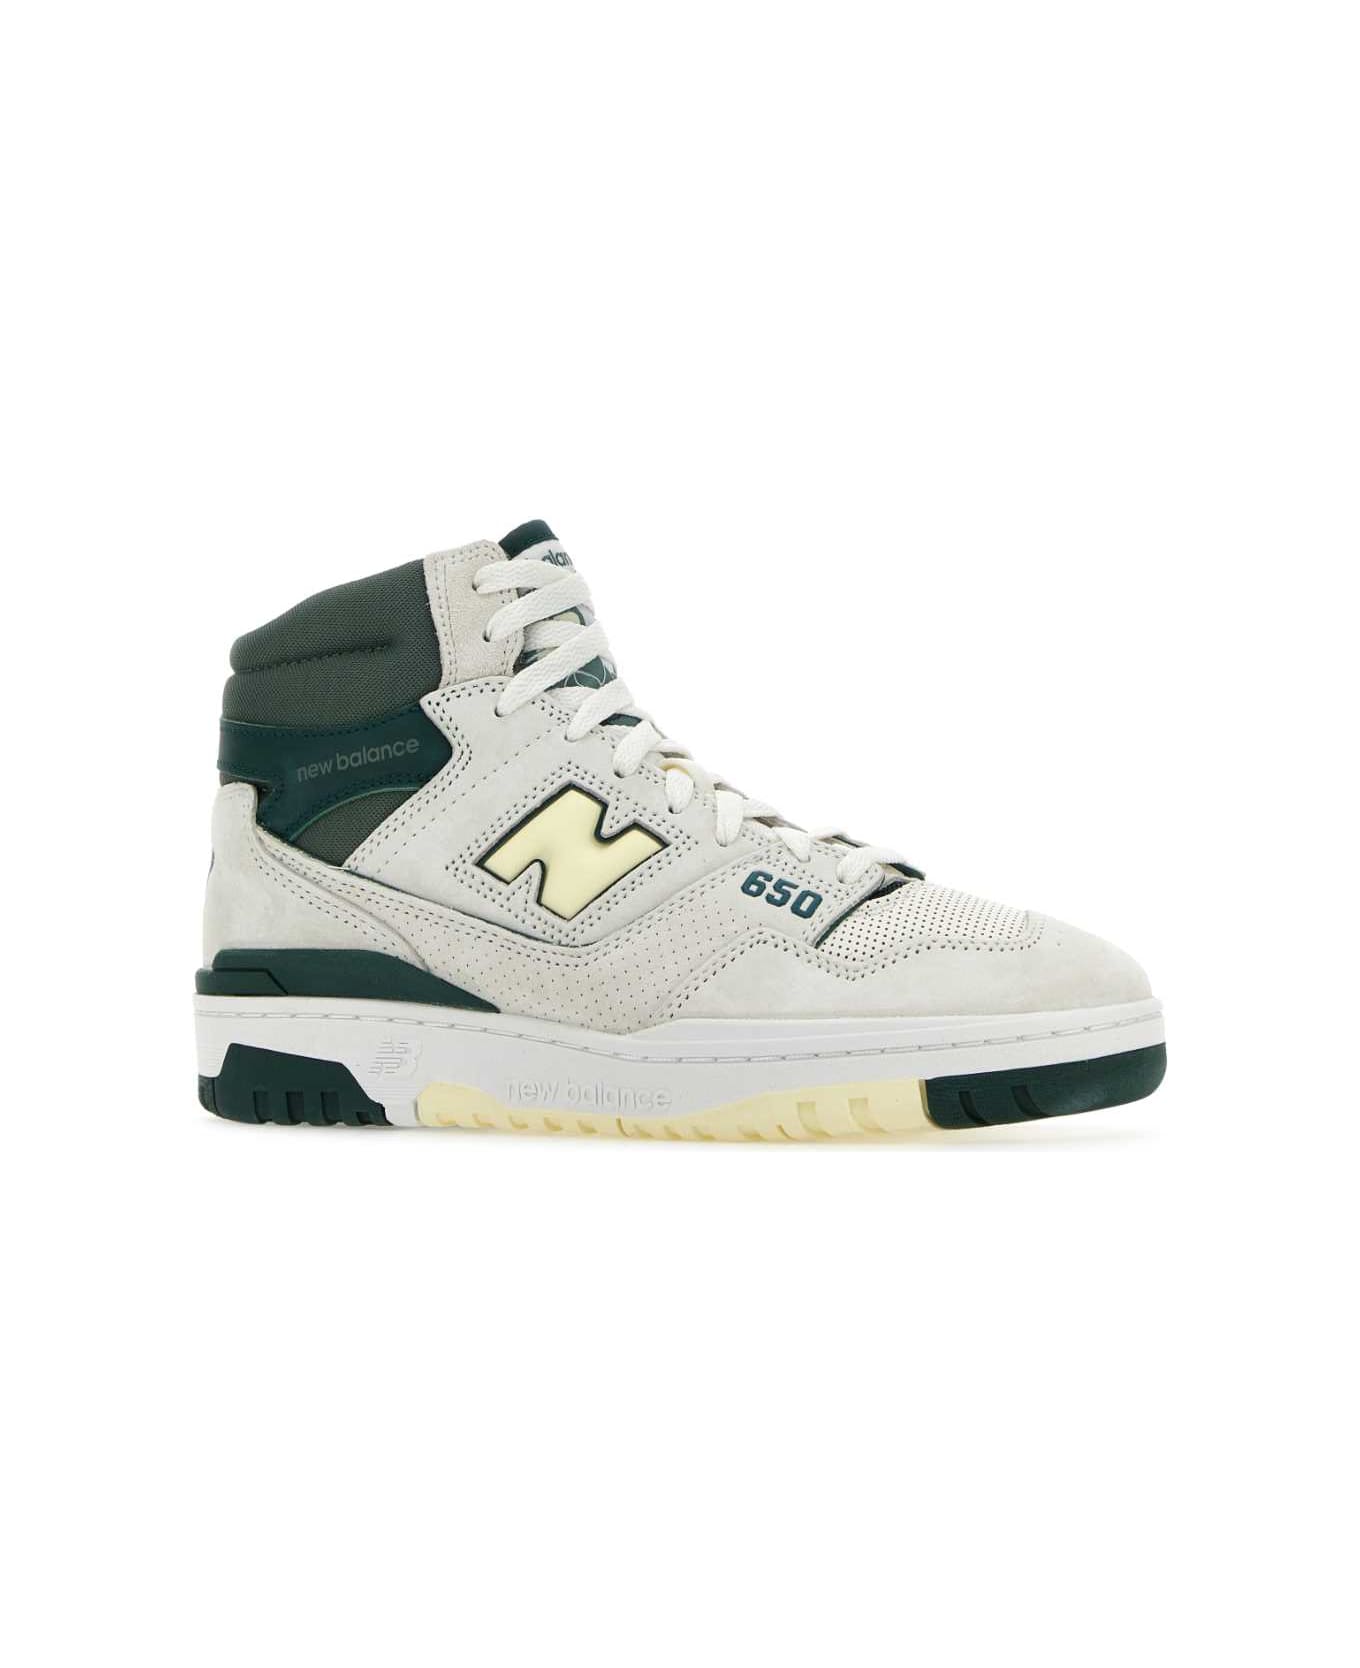 New Balance Multicolor Leather And Suede 650 Sneakers - GREENWHITE